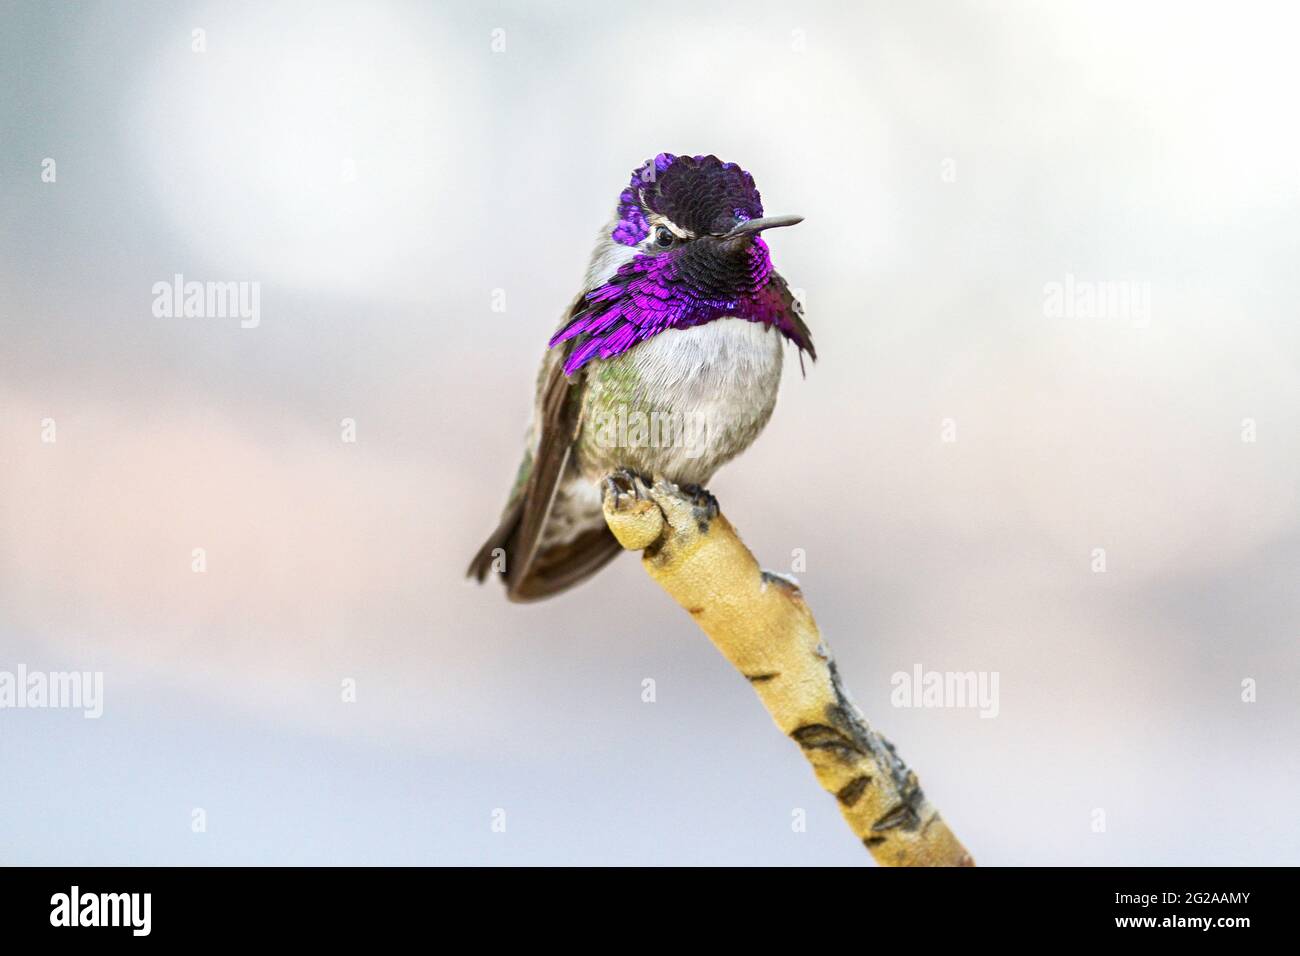 Colorful male Costa’s hummingbird with vibrant, iridescent purple cap and gorget stands on the tip of a single branch and looks at the camera. Stock Photo